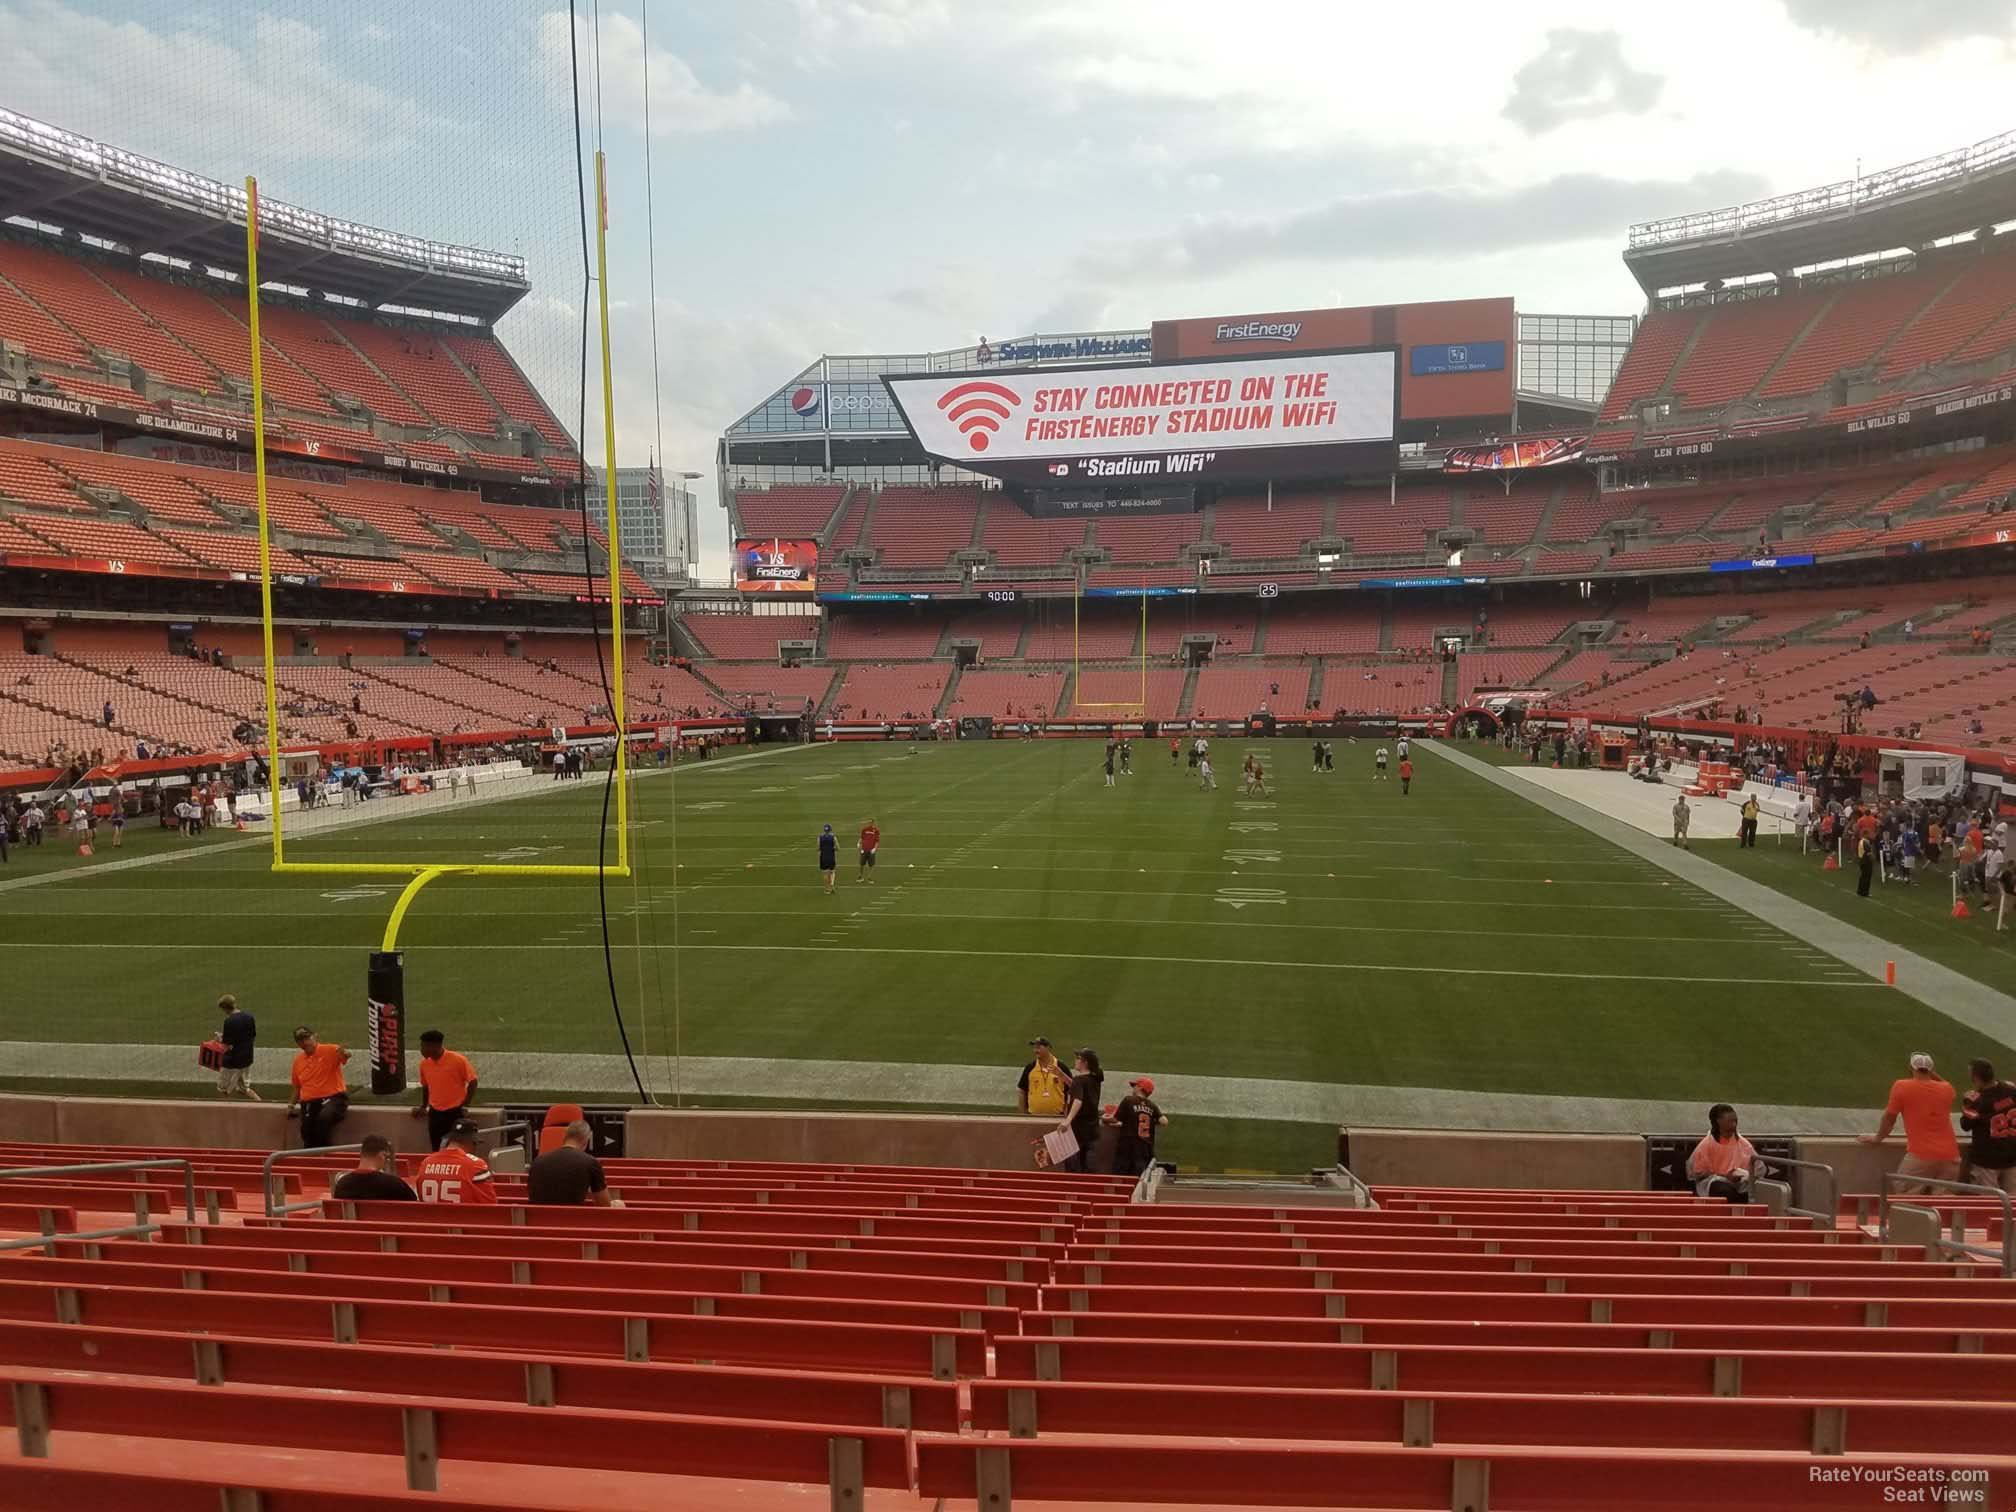 section 121, row 17 seat view  - cleveland browns stadium